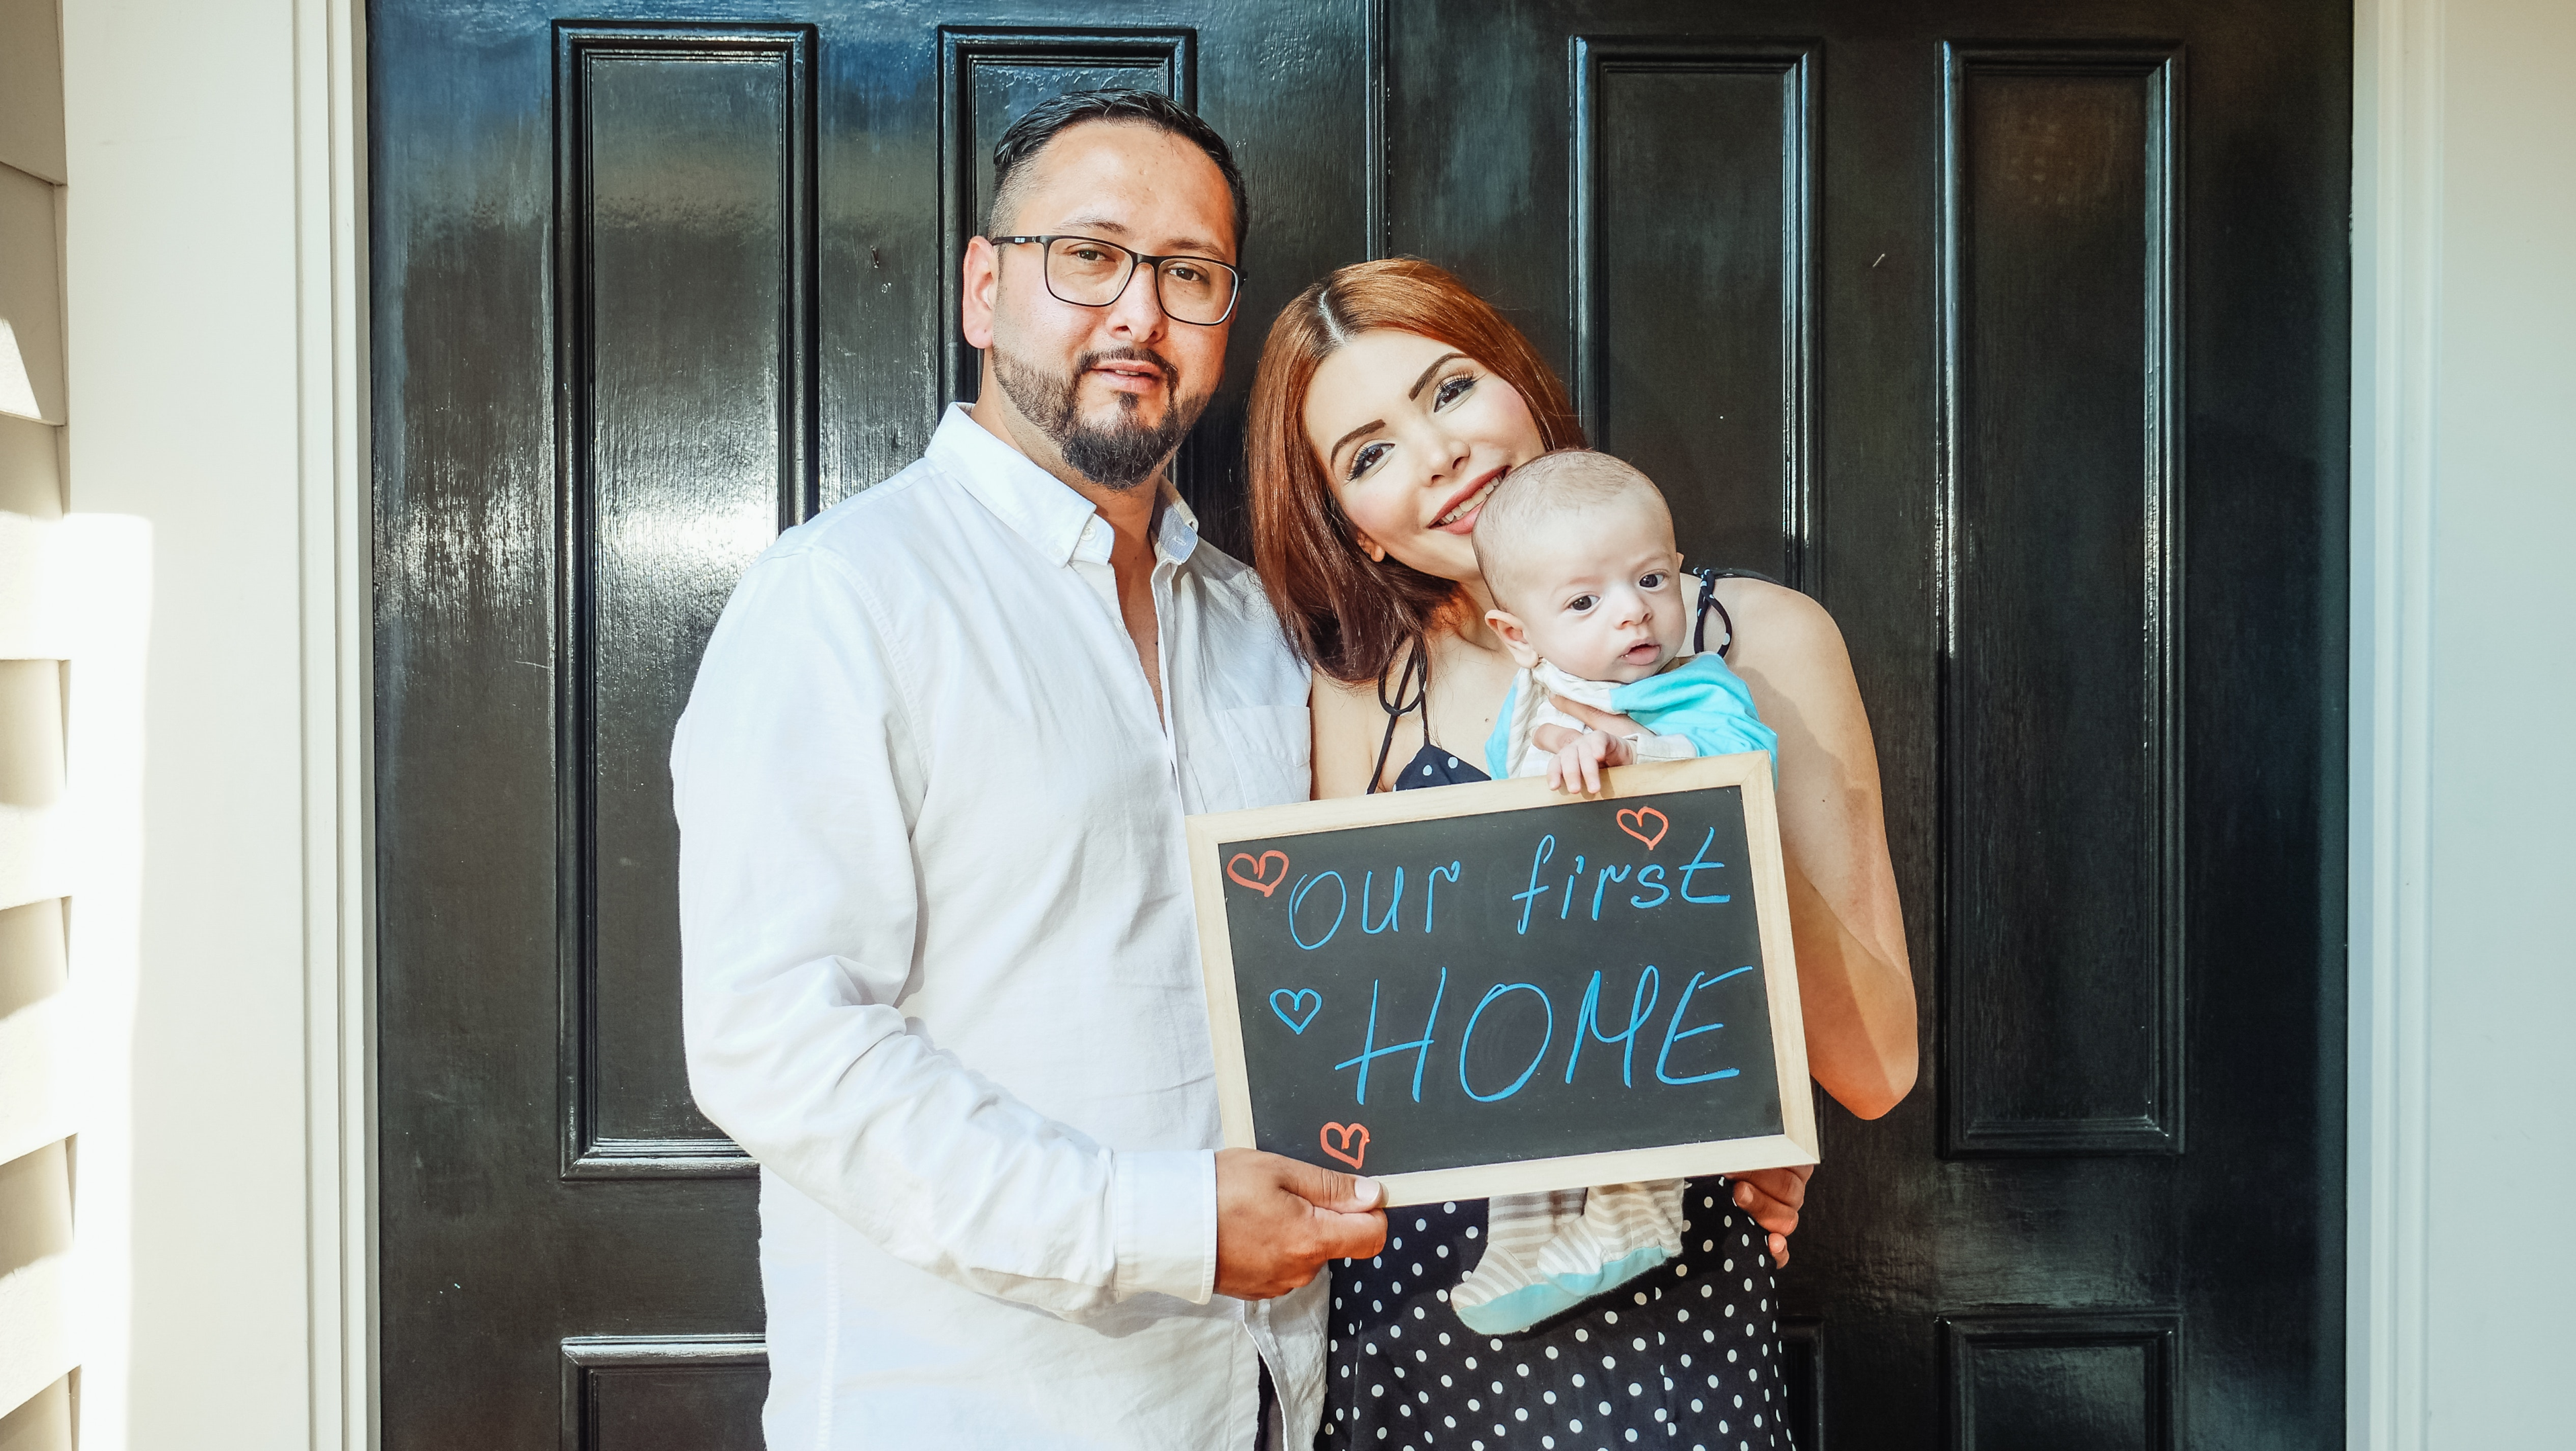 A man with glasses and a woman with red hair hold up an infant child, along with a sign that says "Our first home"